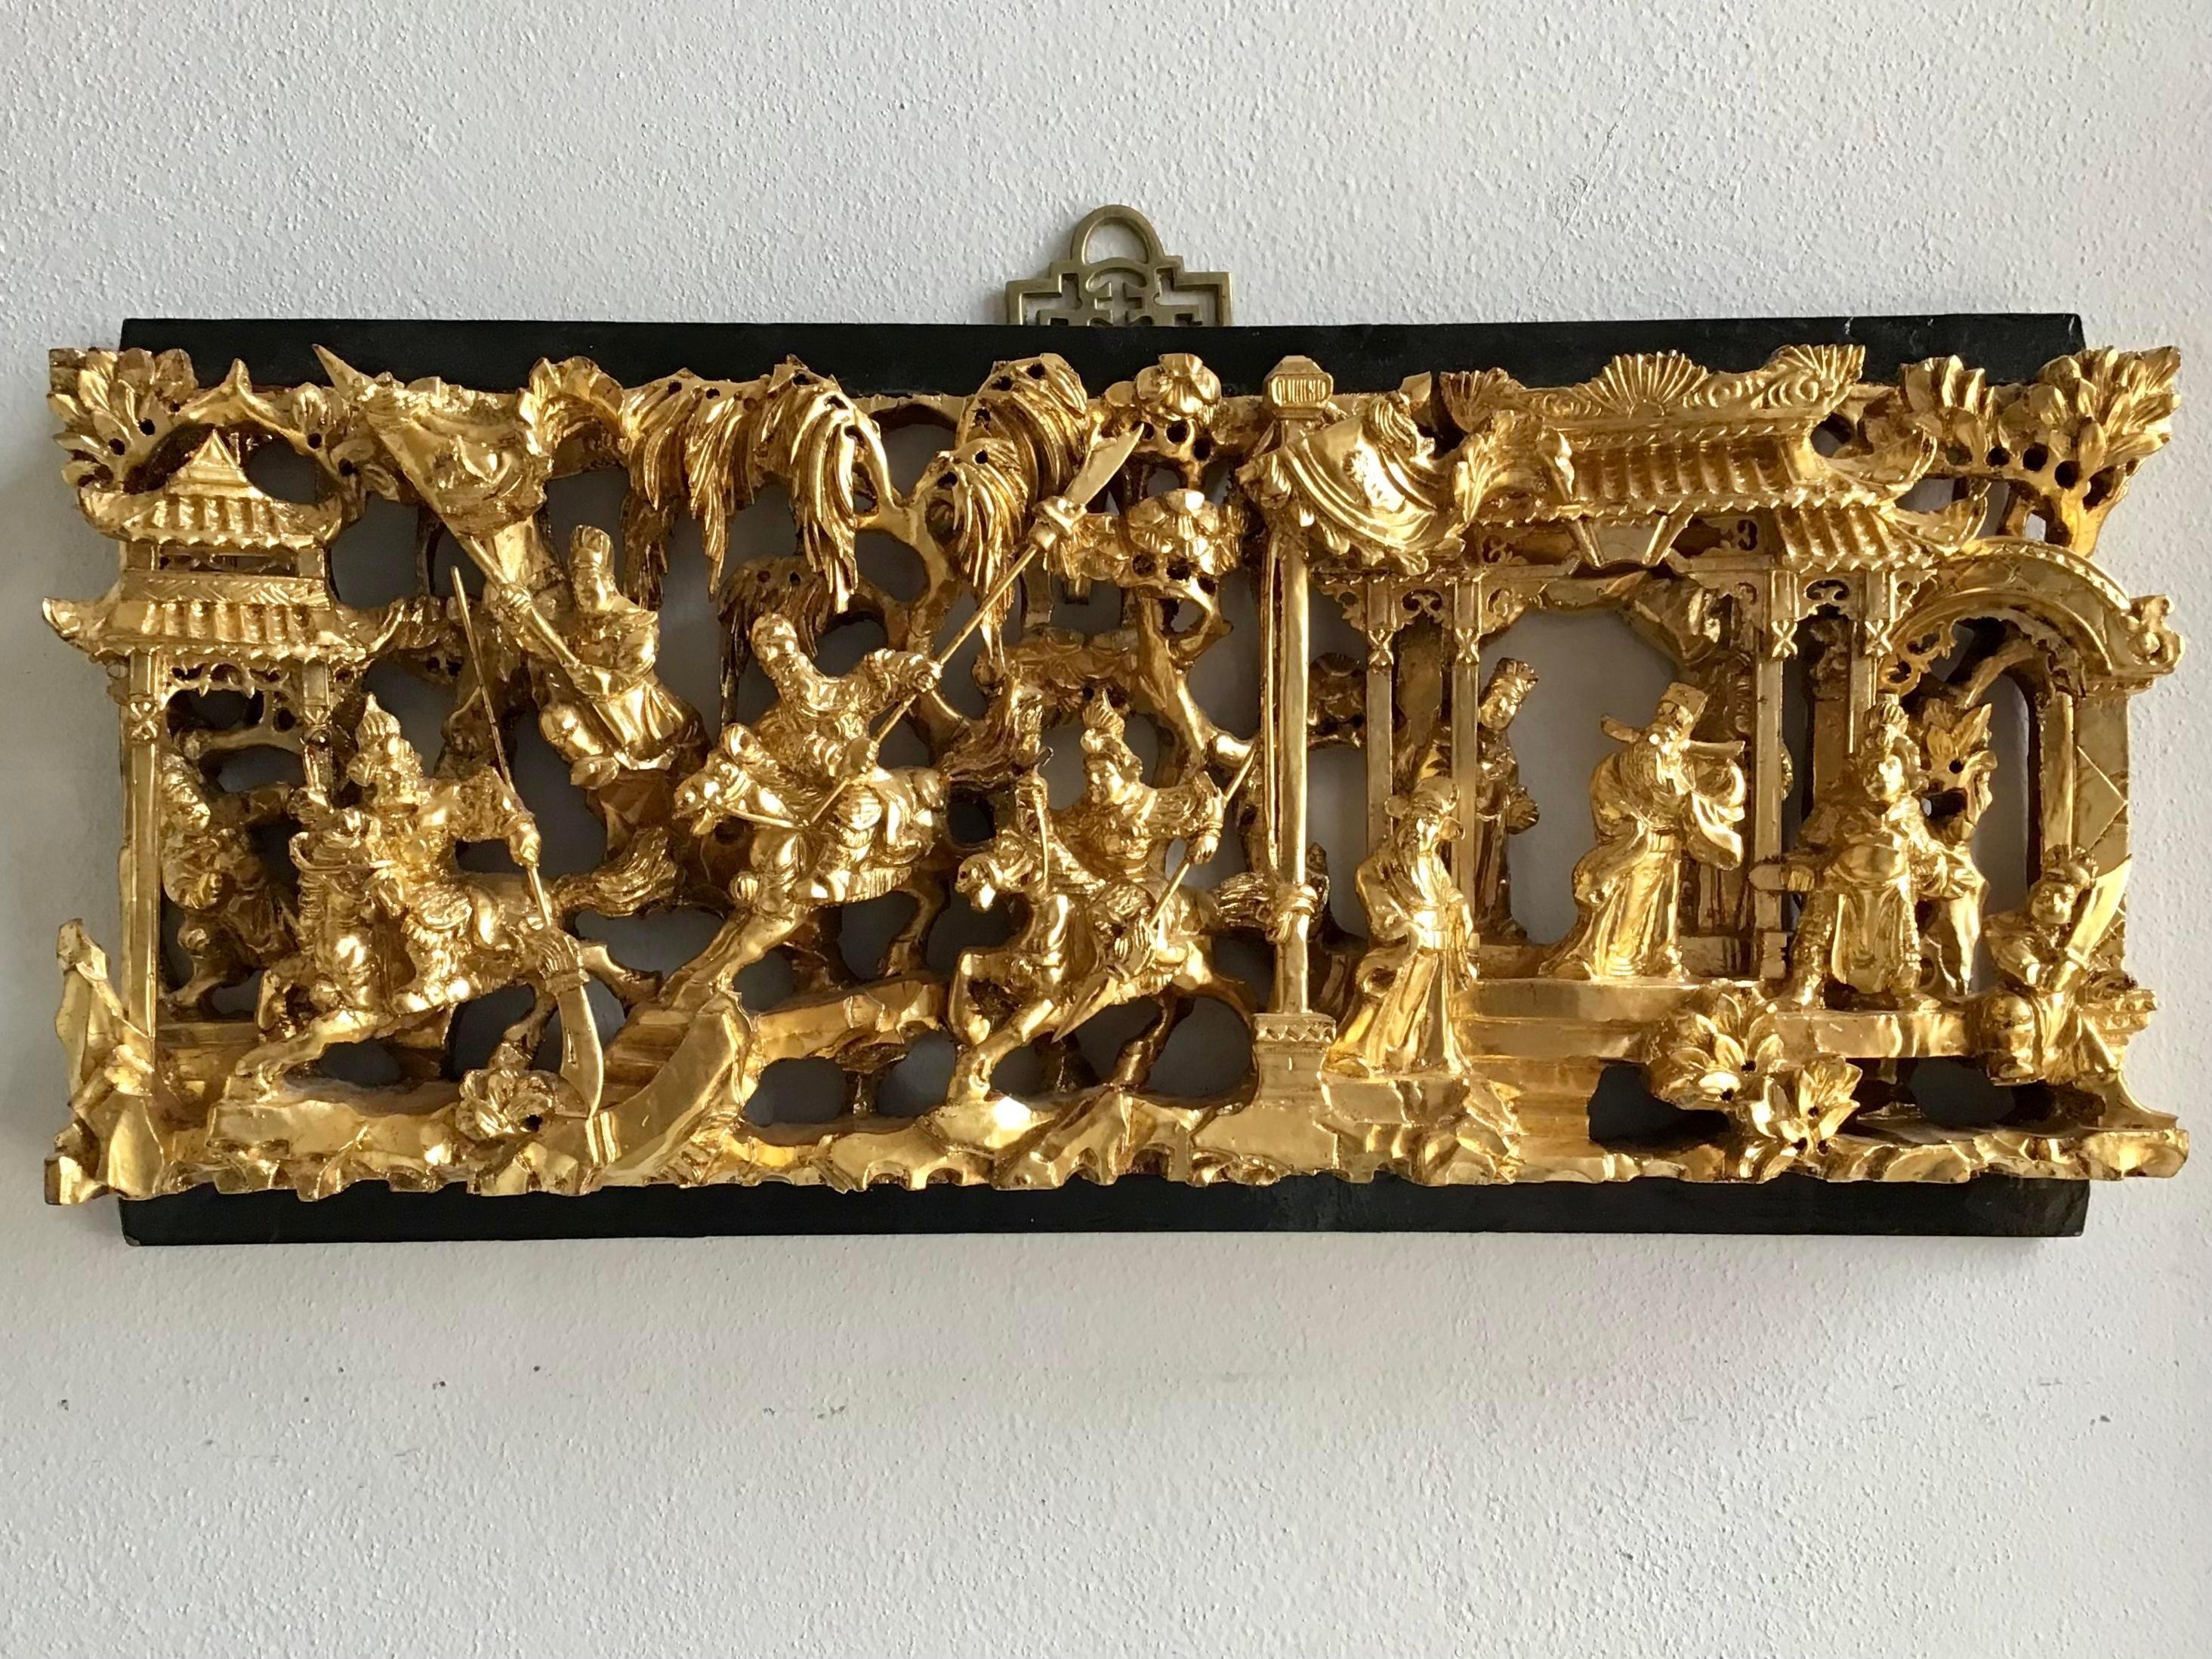 Beautiful rectangular wall piece of an Asian scene carved on wood. Great details painted in gold.